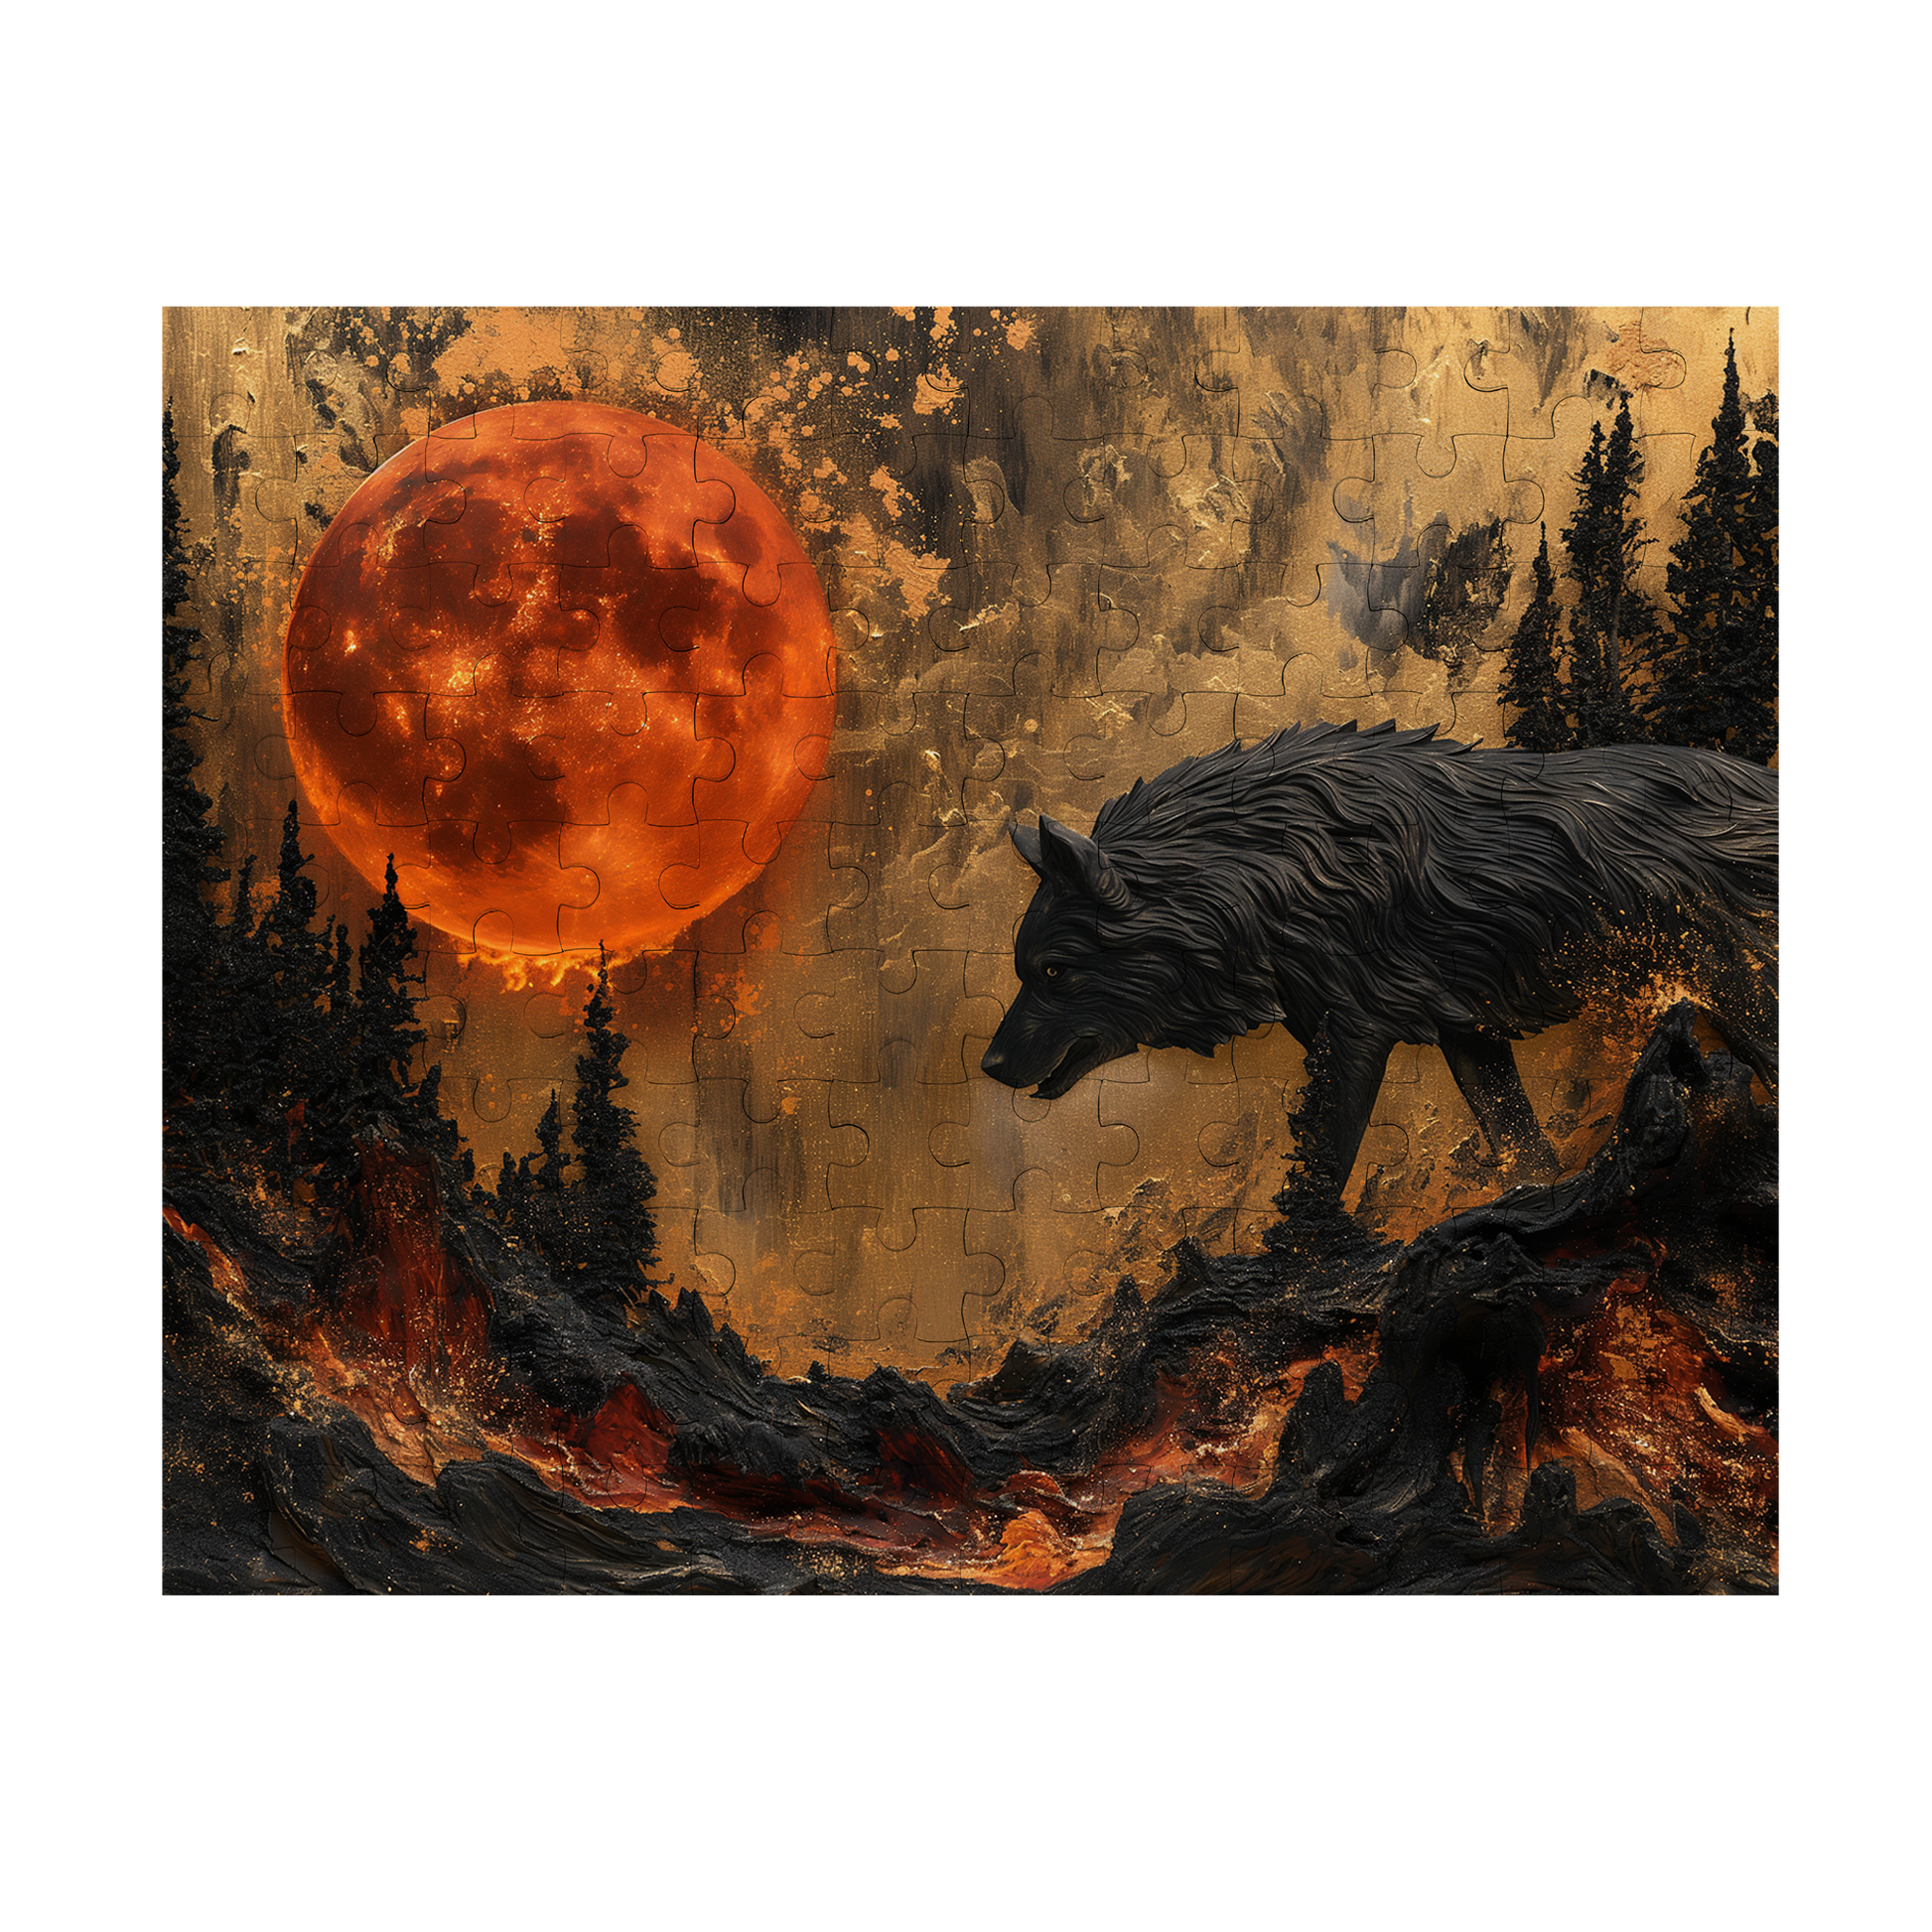 Hunters 08 - Premium Jigsaw Puzzle, Majestic, Primal - Multiple Sizes Available